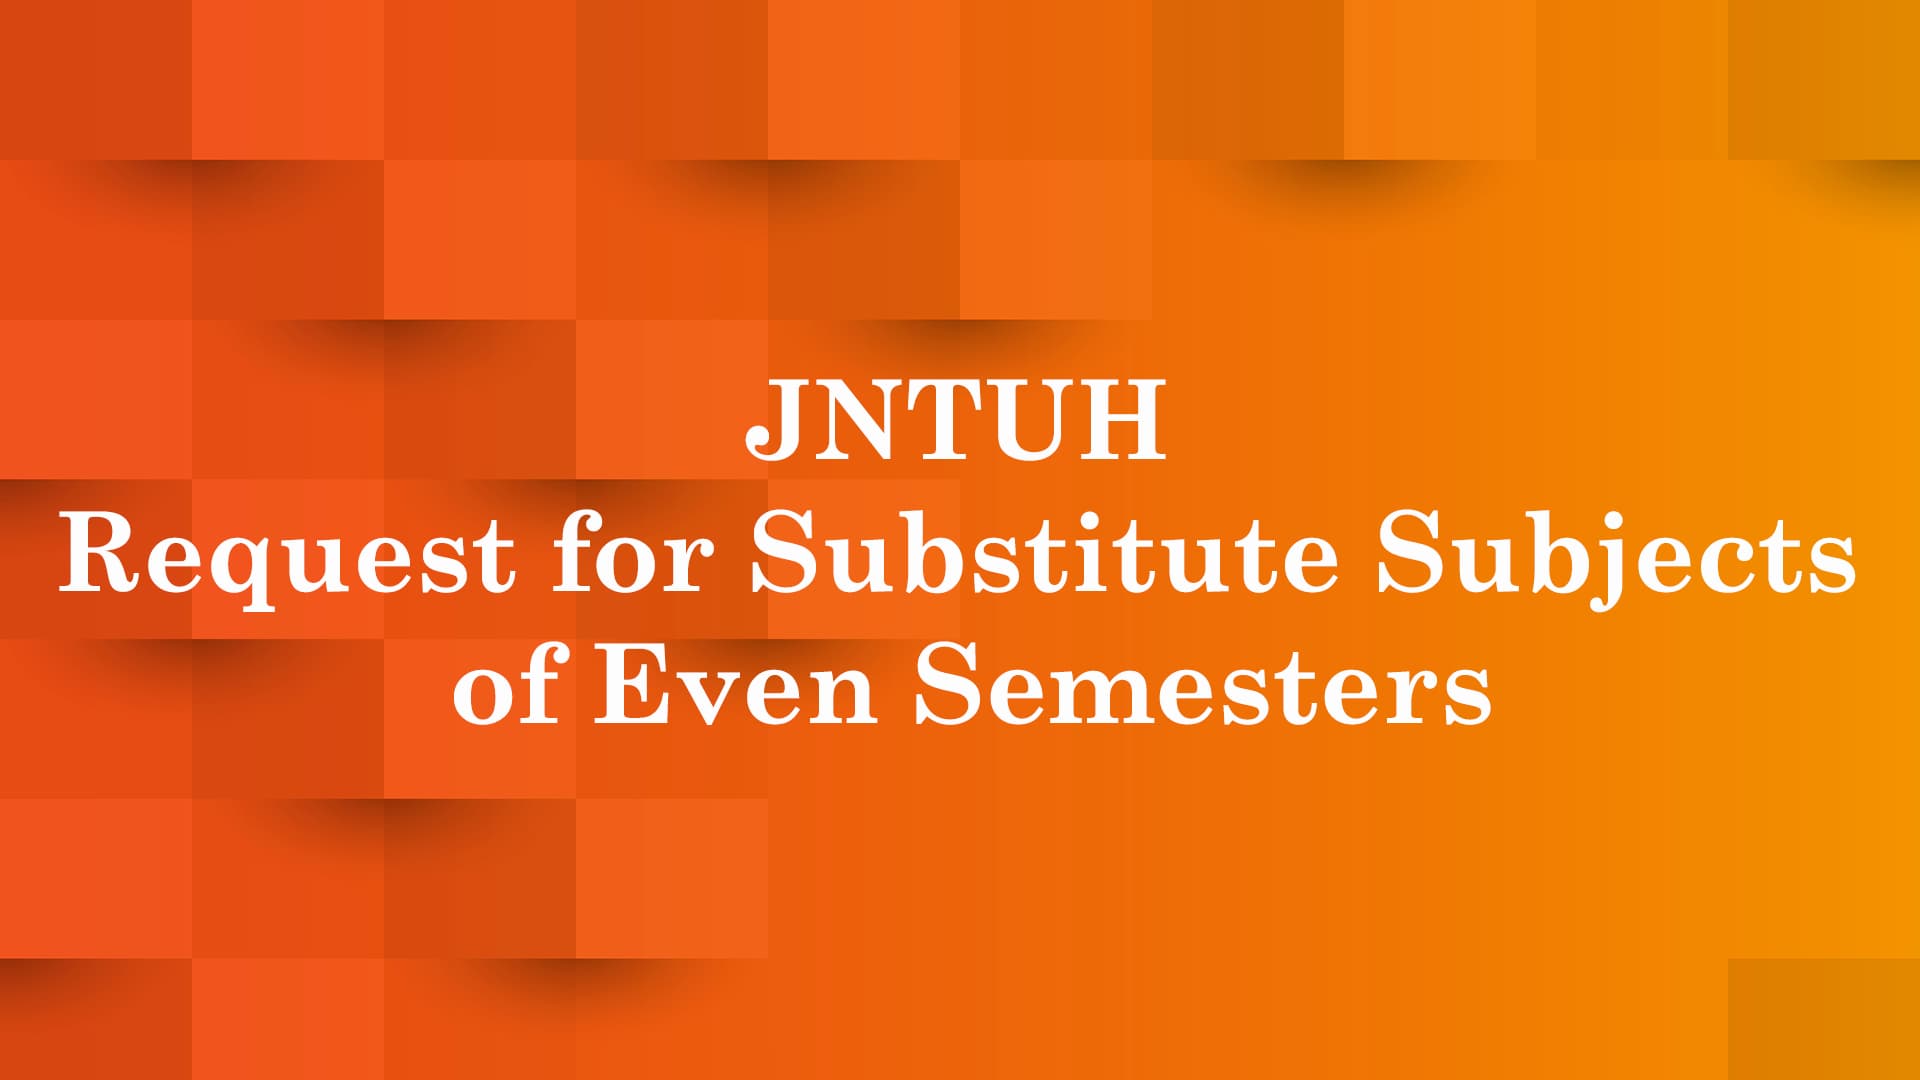 JNTUH Request for Substitute Subjects of Even Semesters